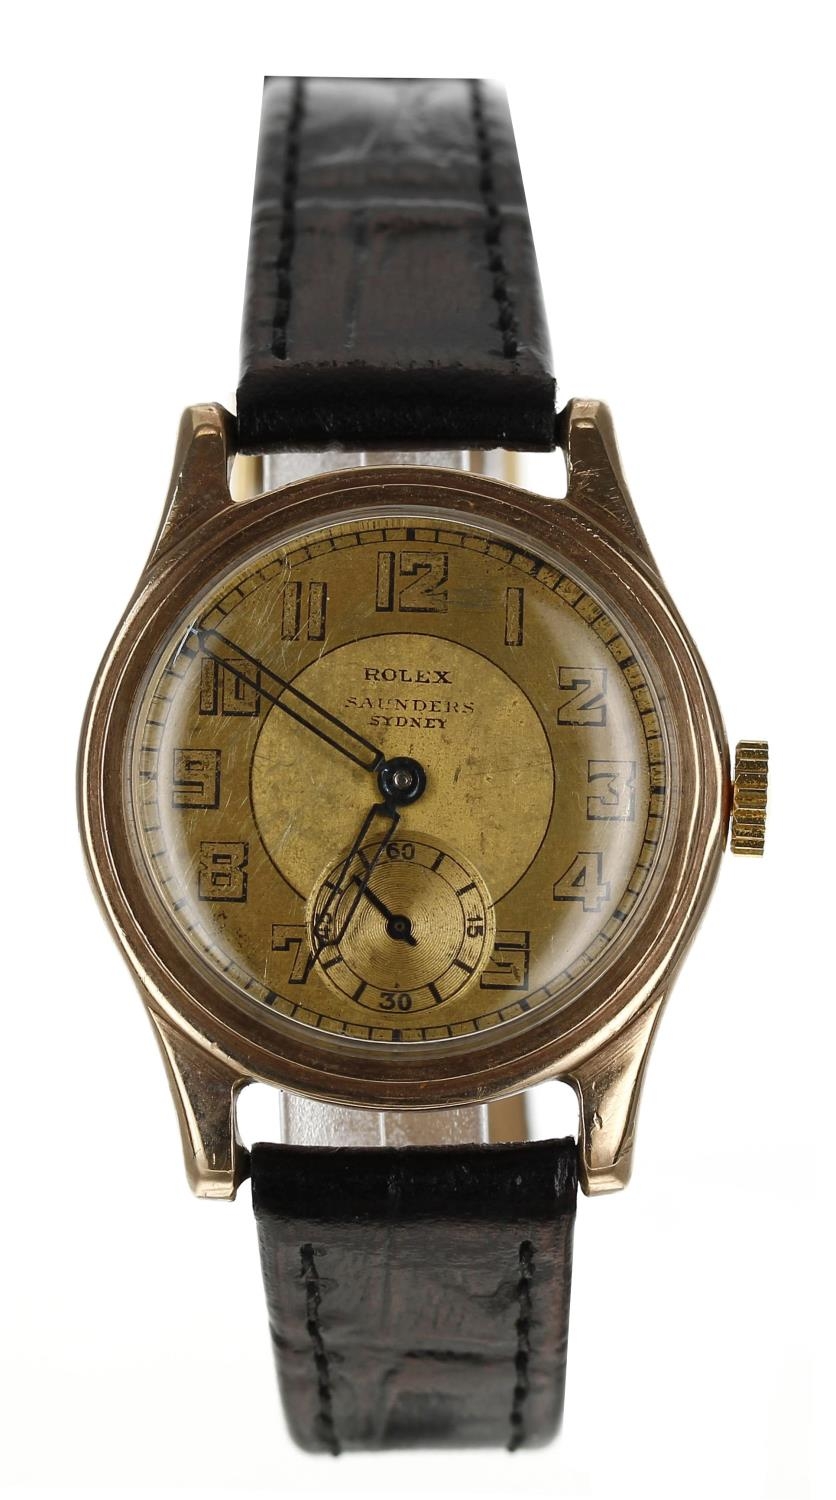 Rolex 9ct mid-size wristwatch, retailed by Saunders, Sydney, signed and branded circular dial with